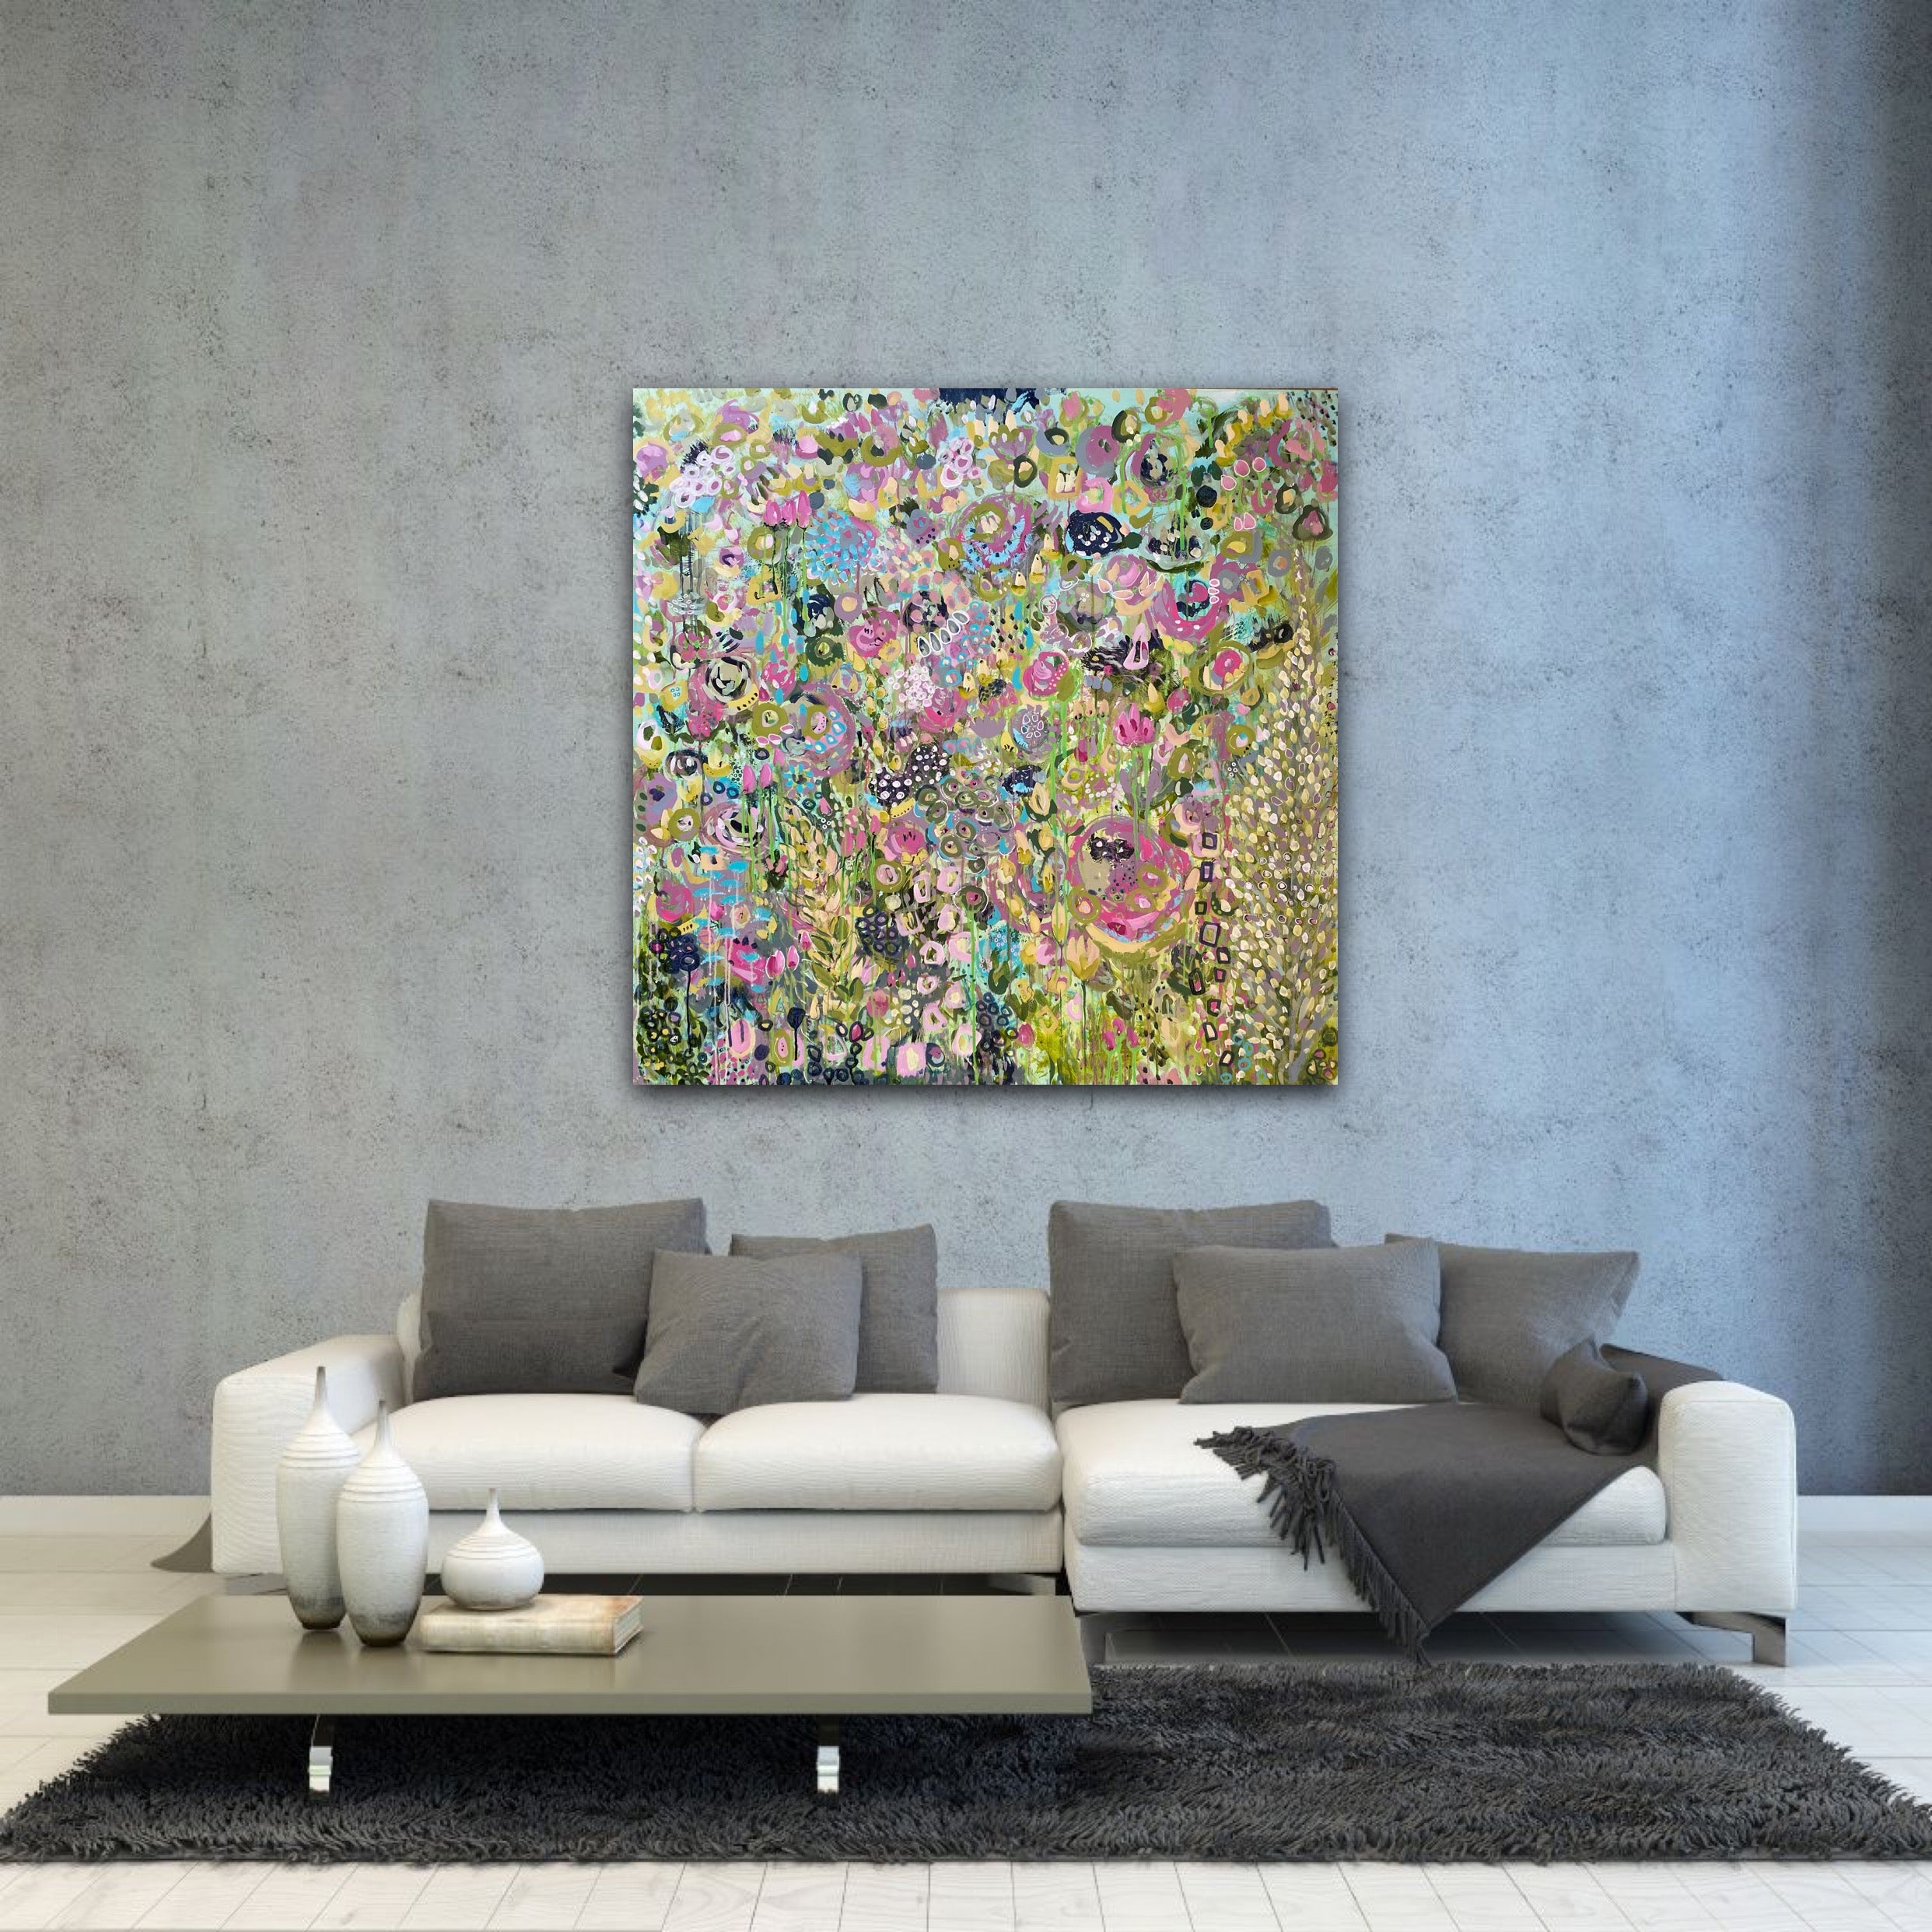 large bright abstract floral painting in sleek modern grey living room